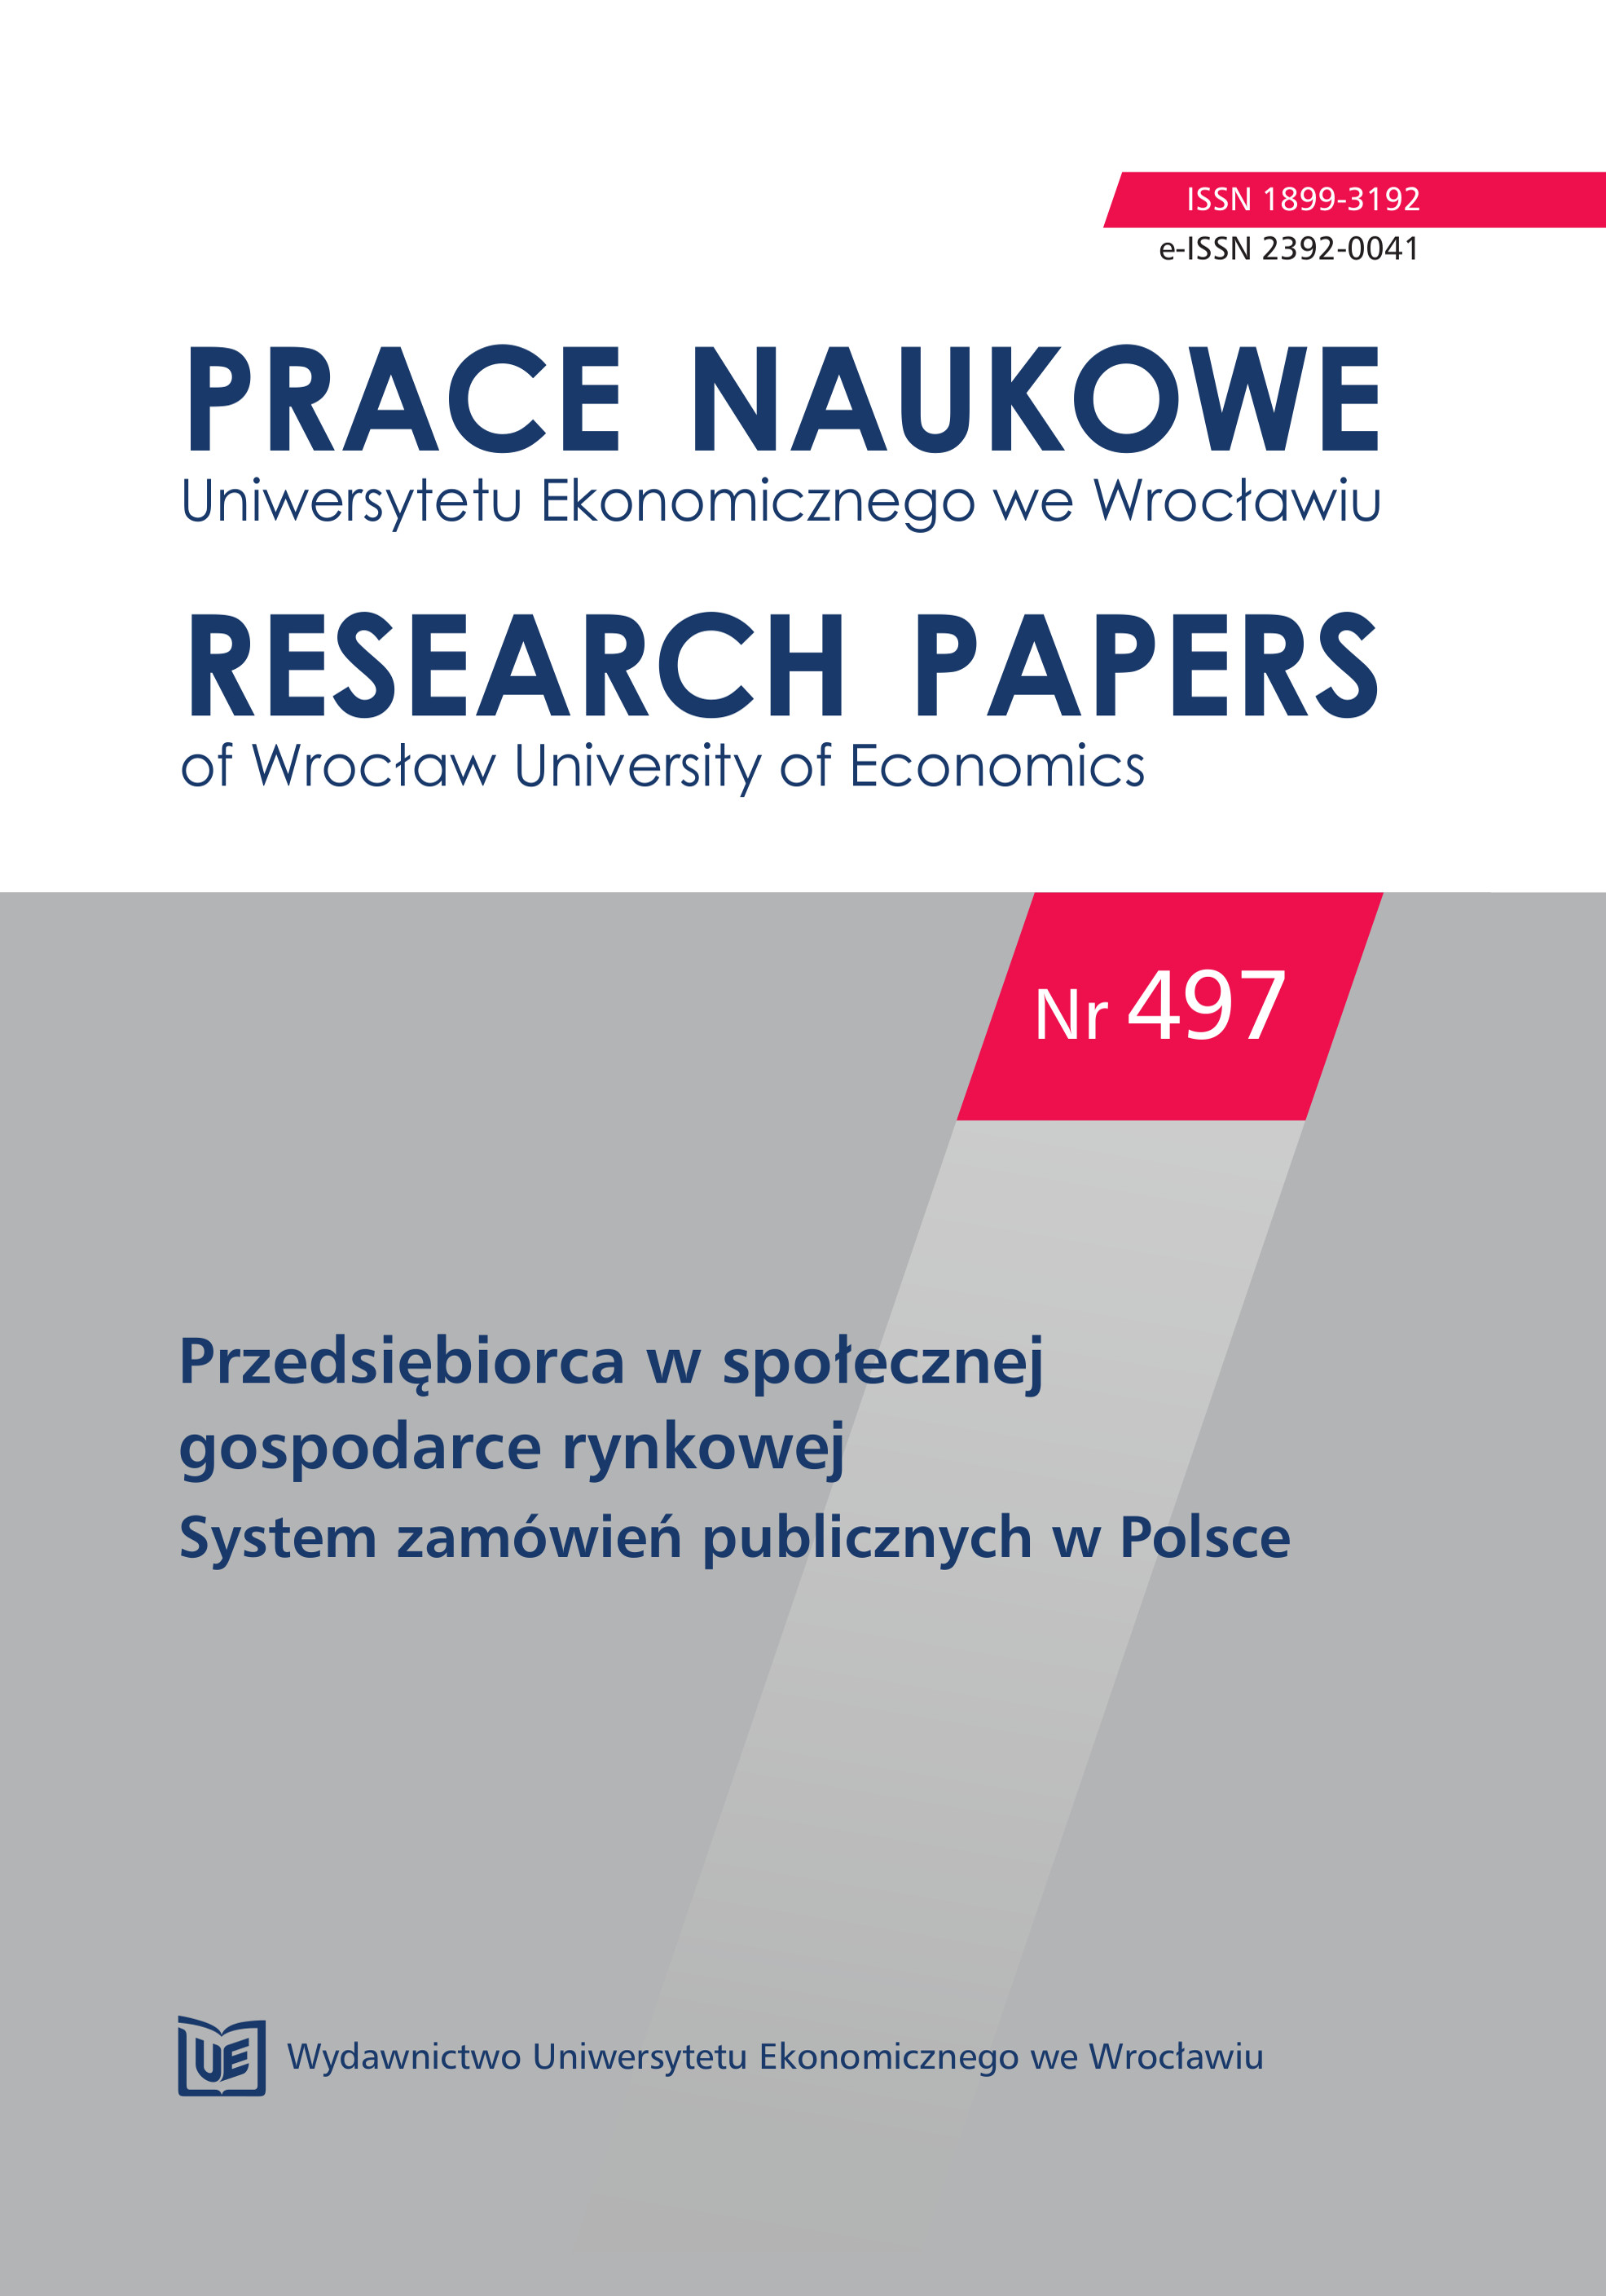 Analysis of evidence of recognising public law entity as an awarding entity based on Public Procurement Law in the light of judicature of Court of Justice of the European Union Cover Image